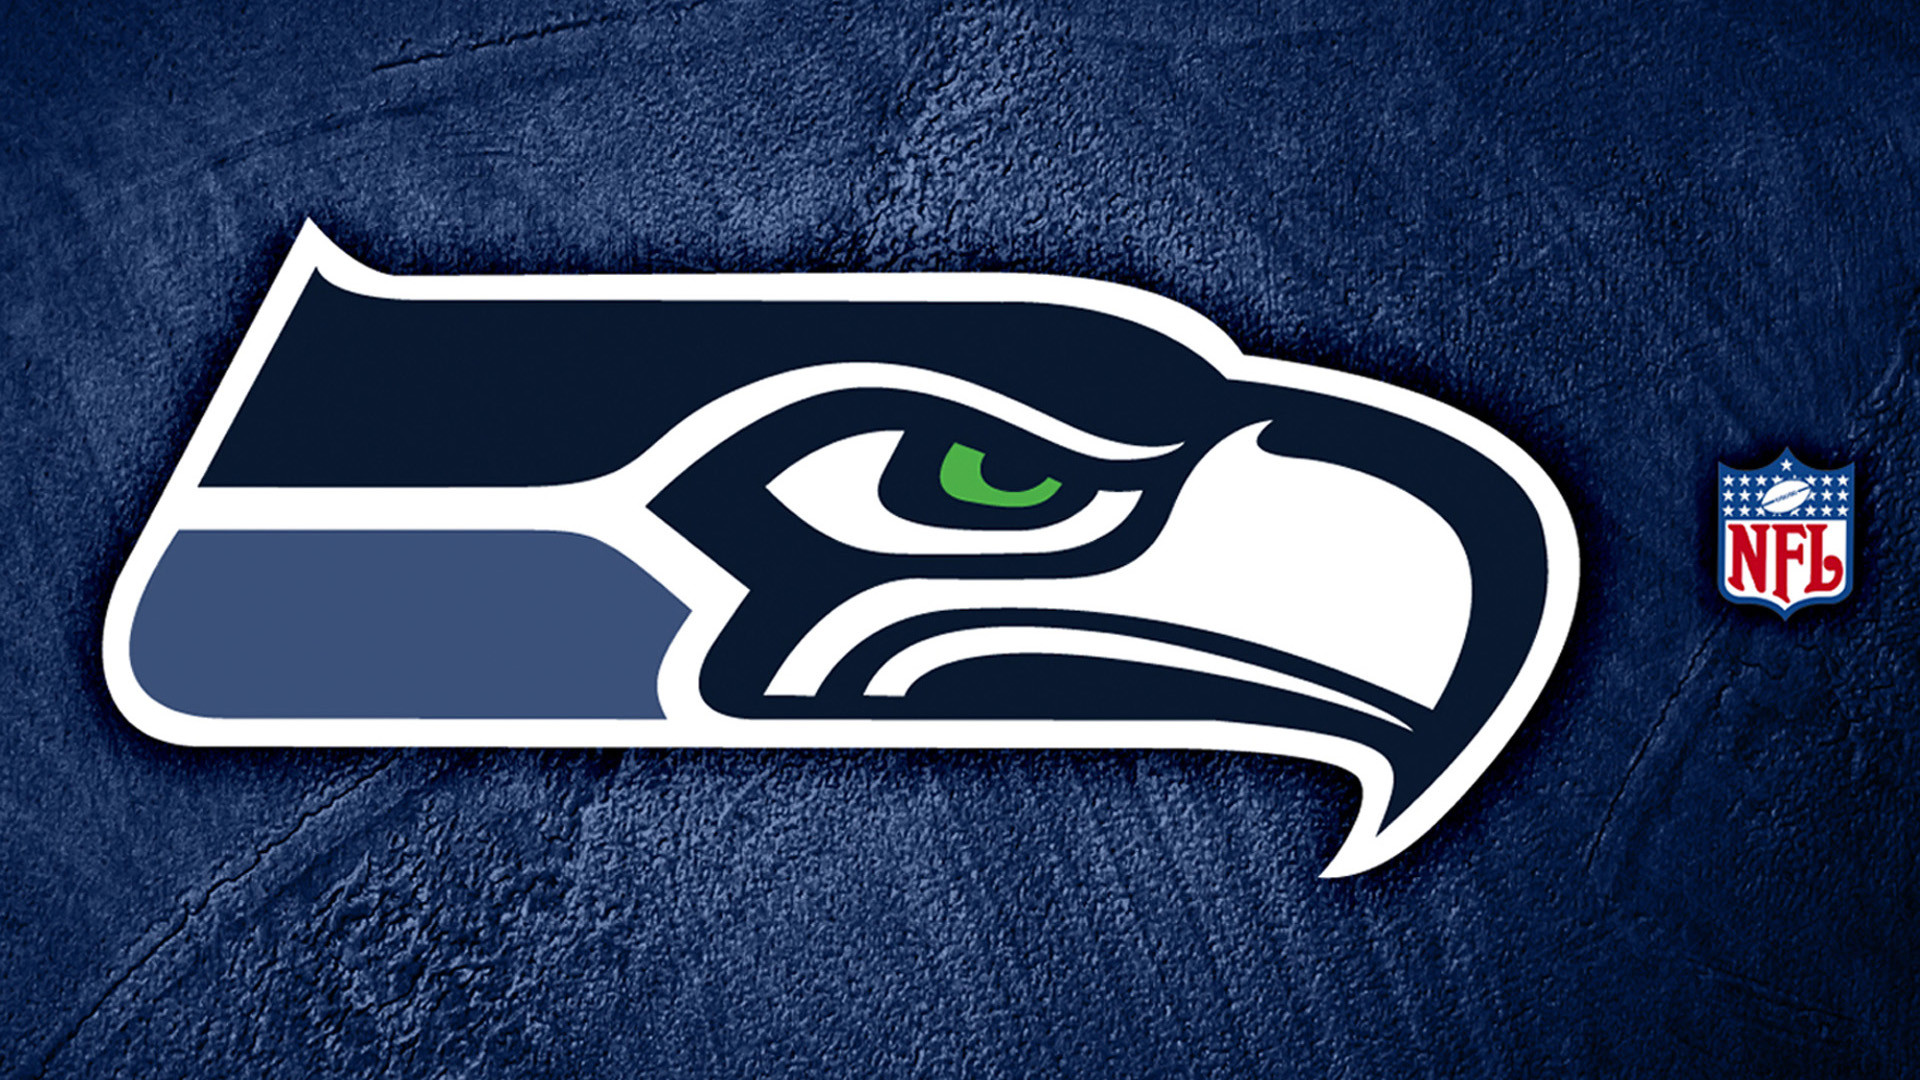 1920x1080 292 Seattle Seahawks HD Wallpapers | Backgrounds - Wallpaper Abyss - Page 3